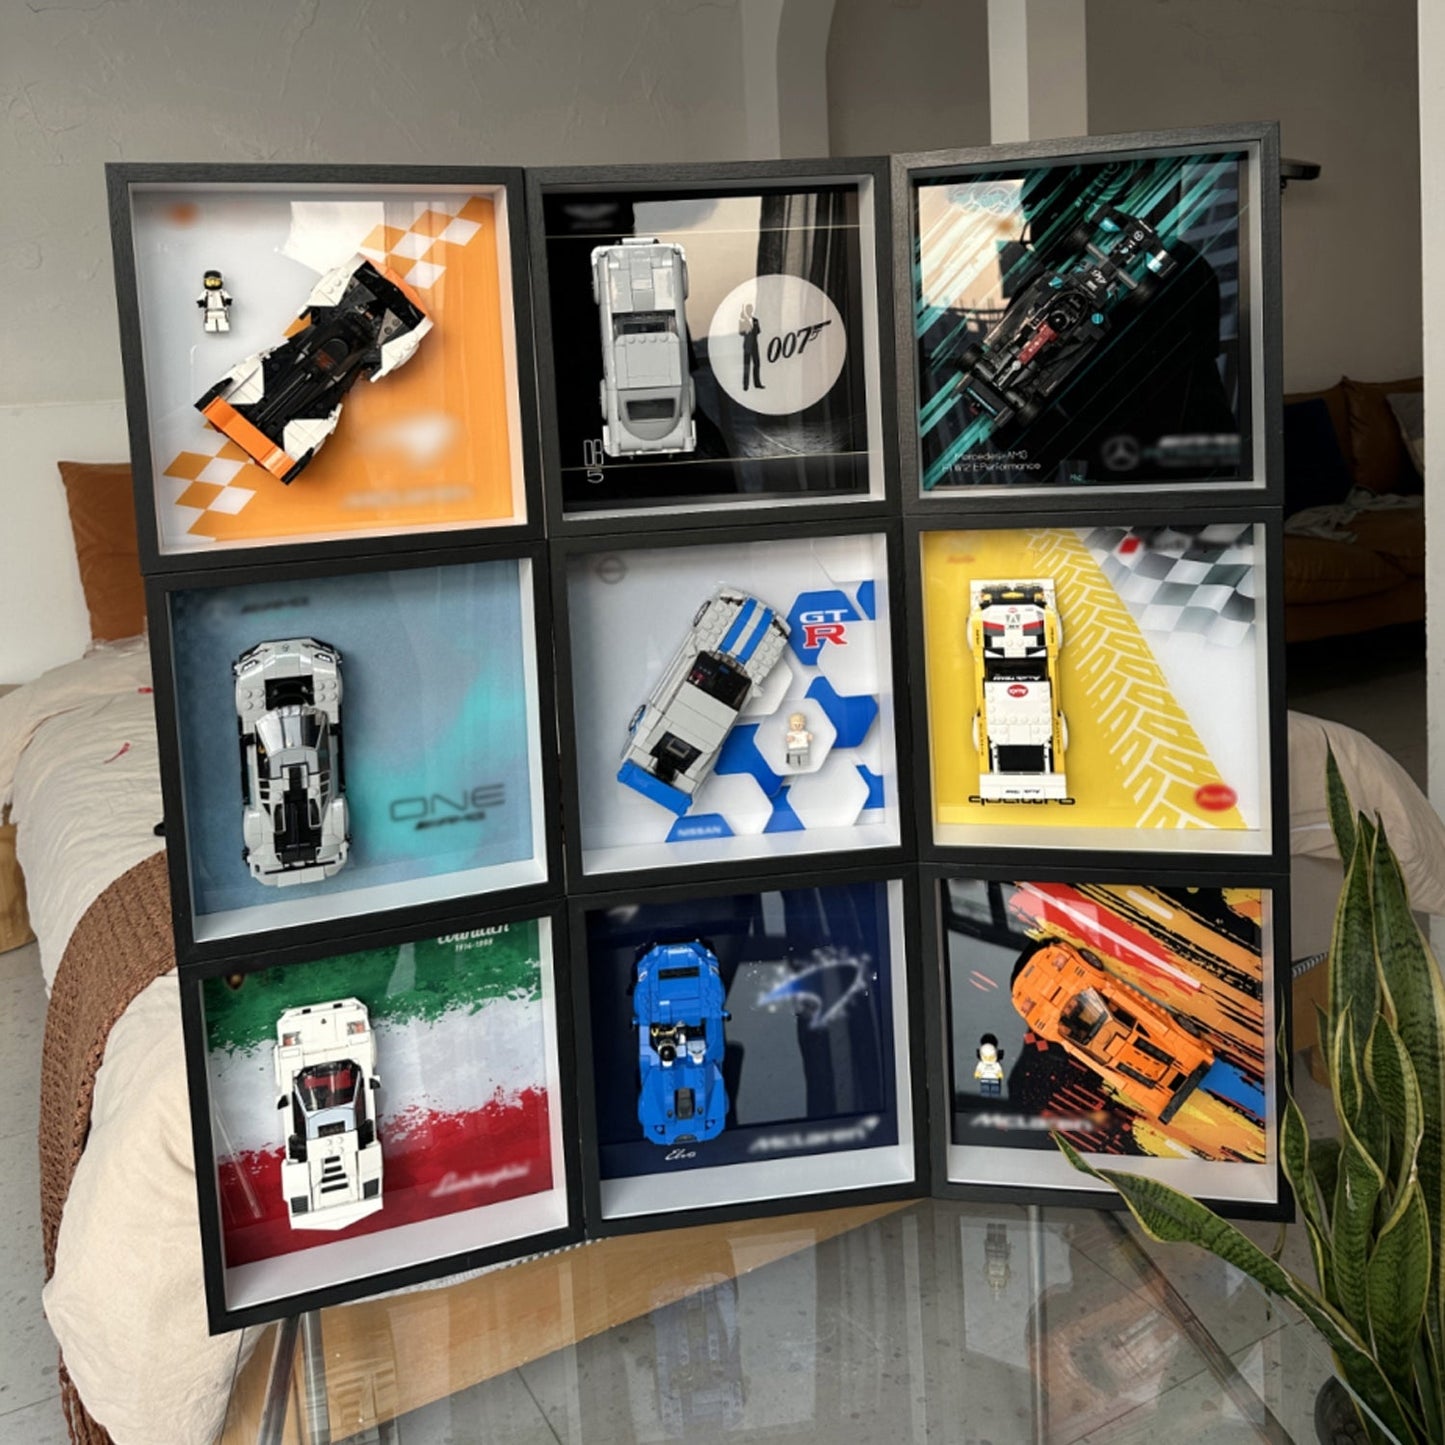 iLuane Display Wallboard for Lego Speed Champions Pagani Utopia 76915 Race Car Toy Model Building Kit, Adult Collectibles Lego Car Wall Mount, Gifts for Lego Lovers(Only Display Wallboard)